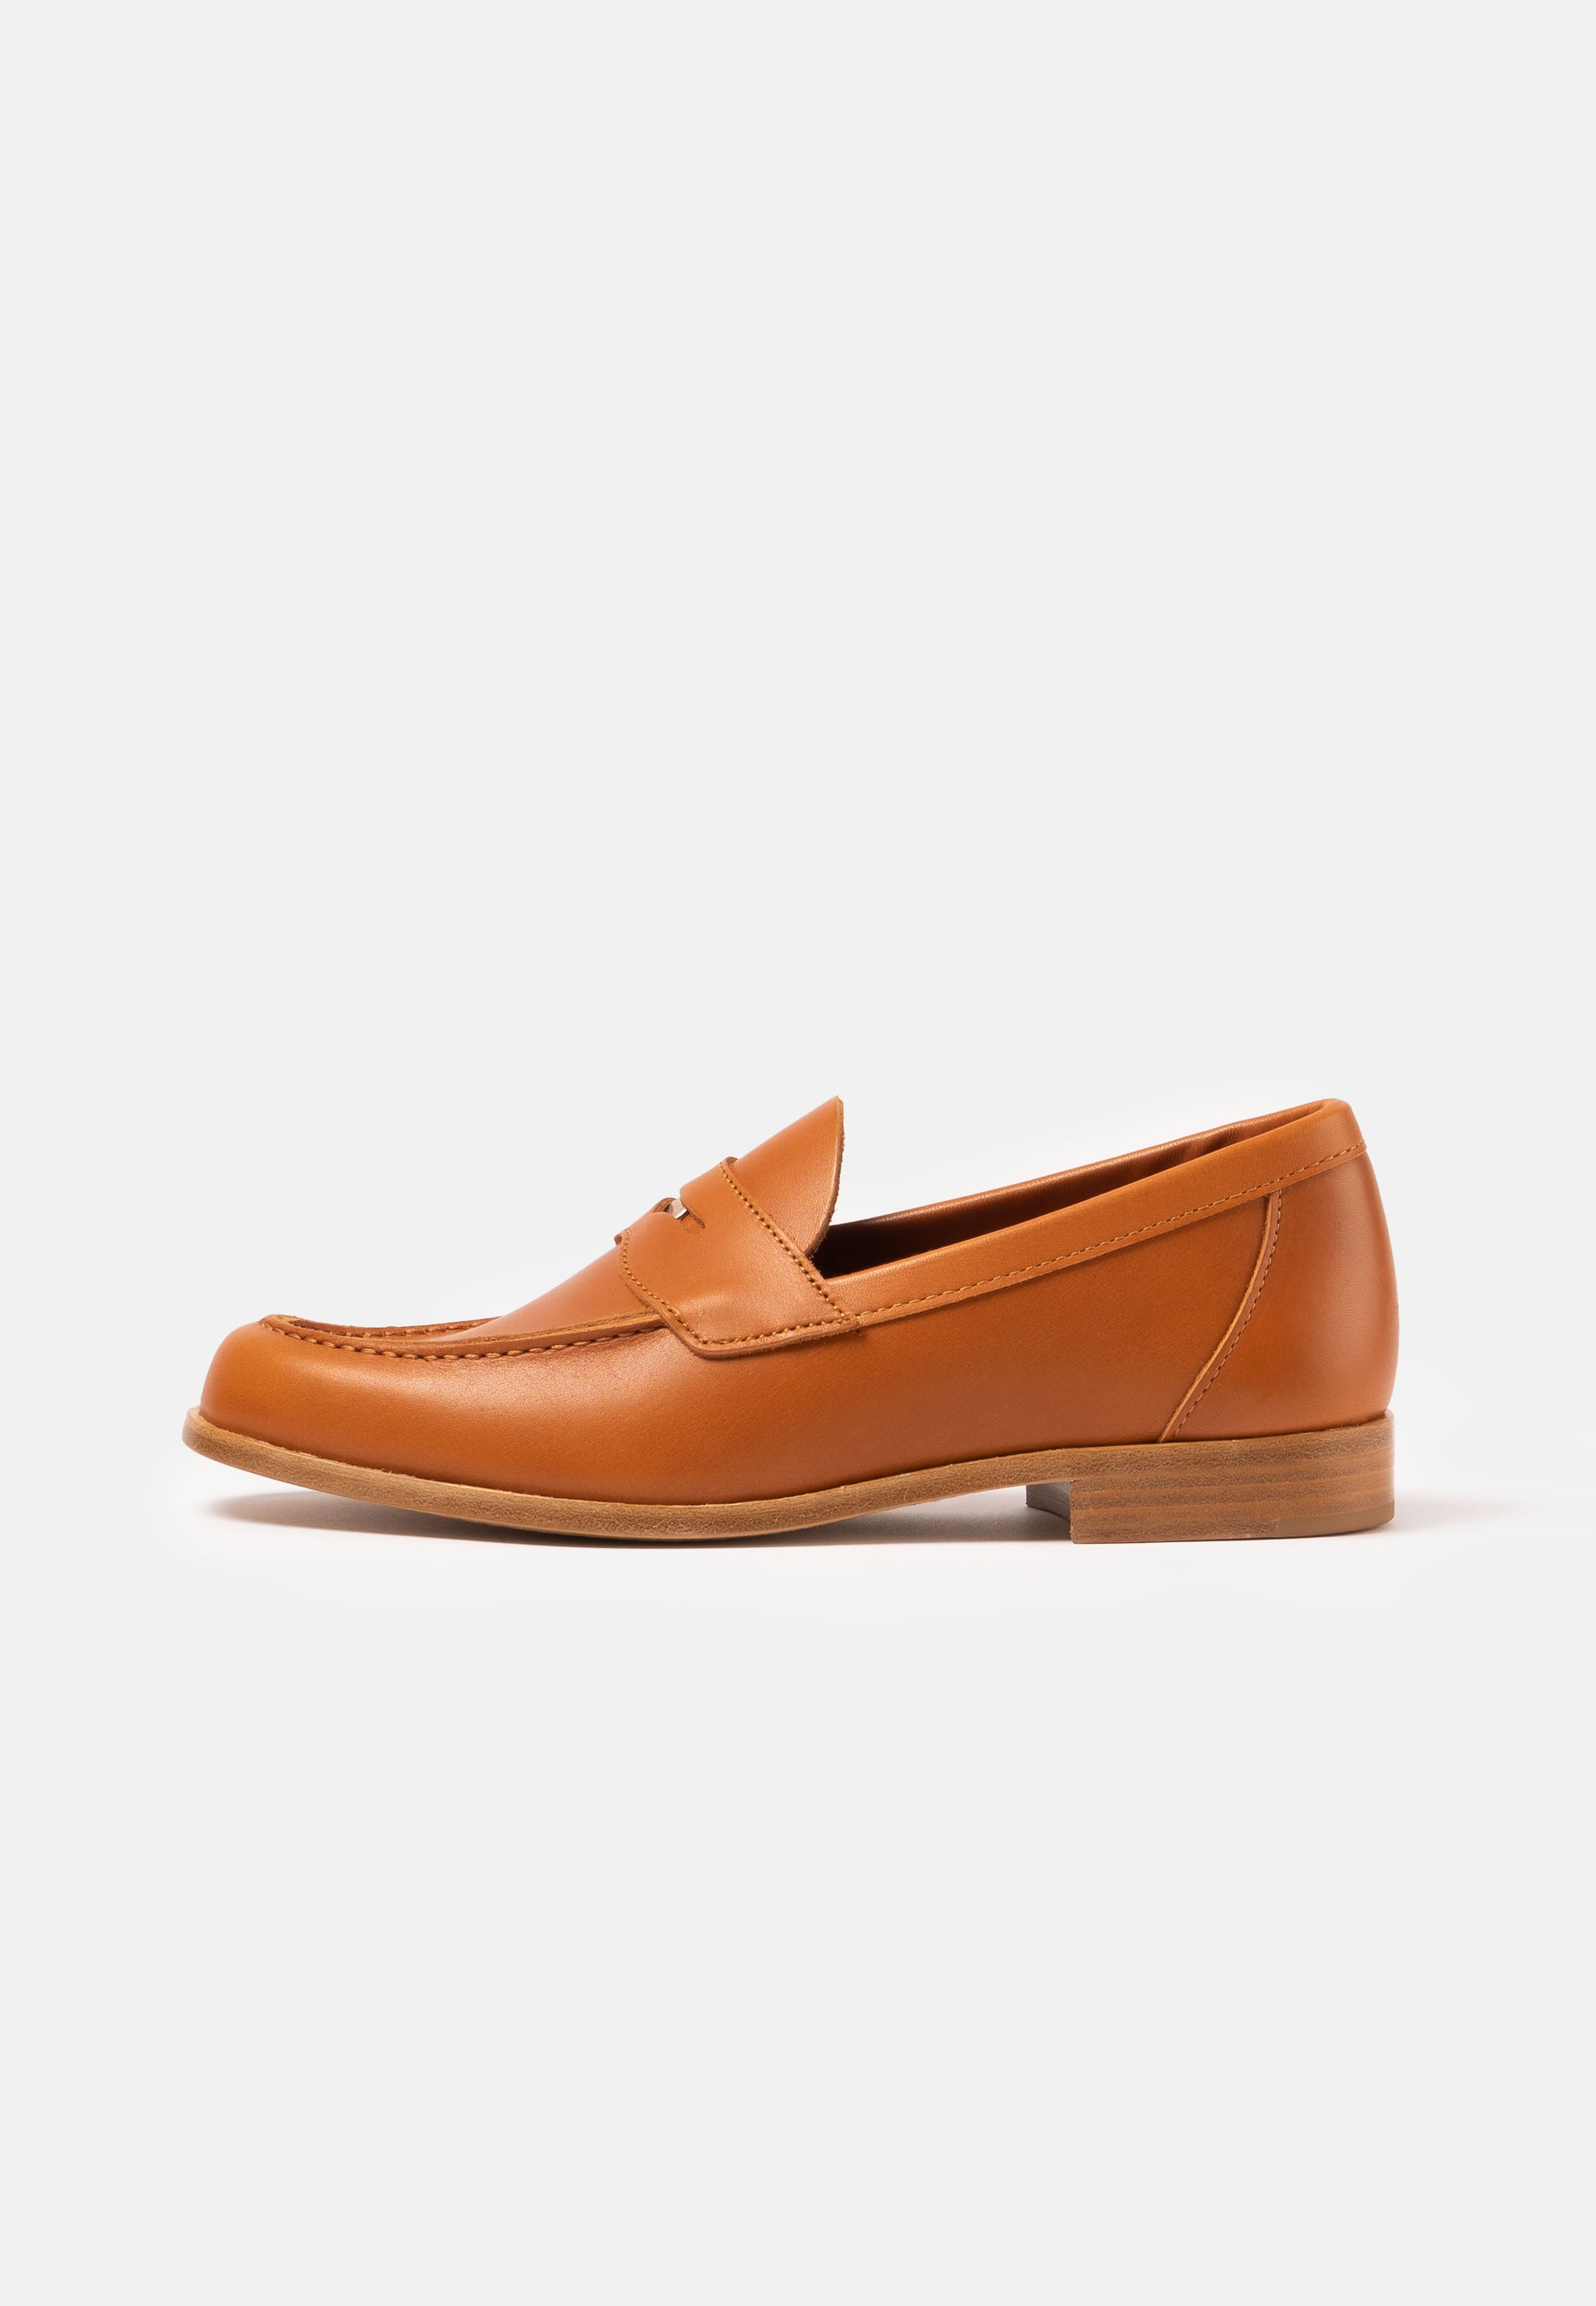 Buxton Natural Nappa - The Original Penny Loafer